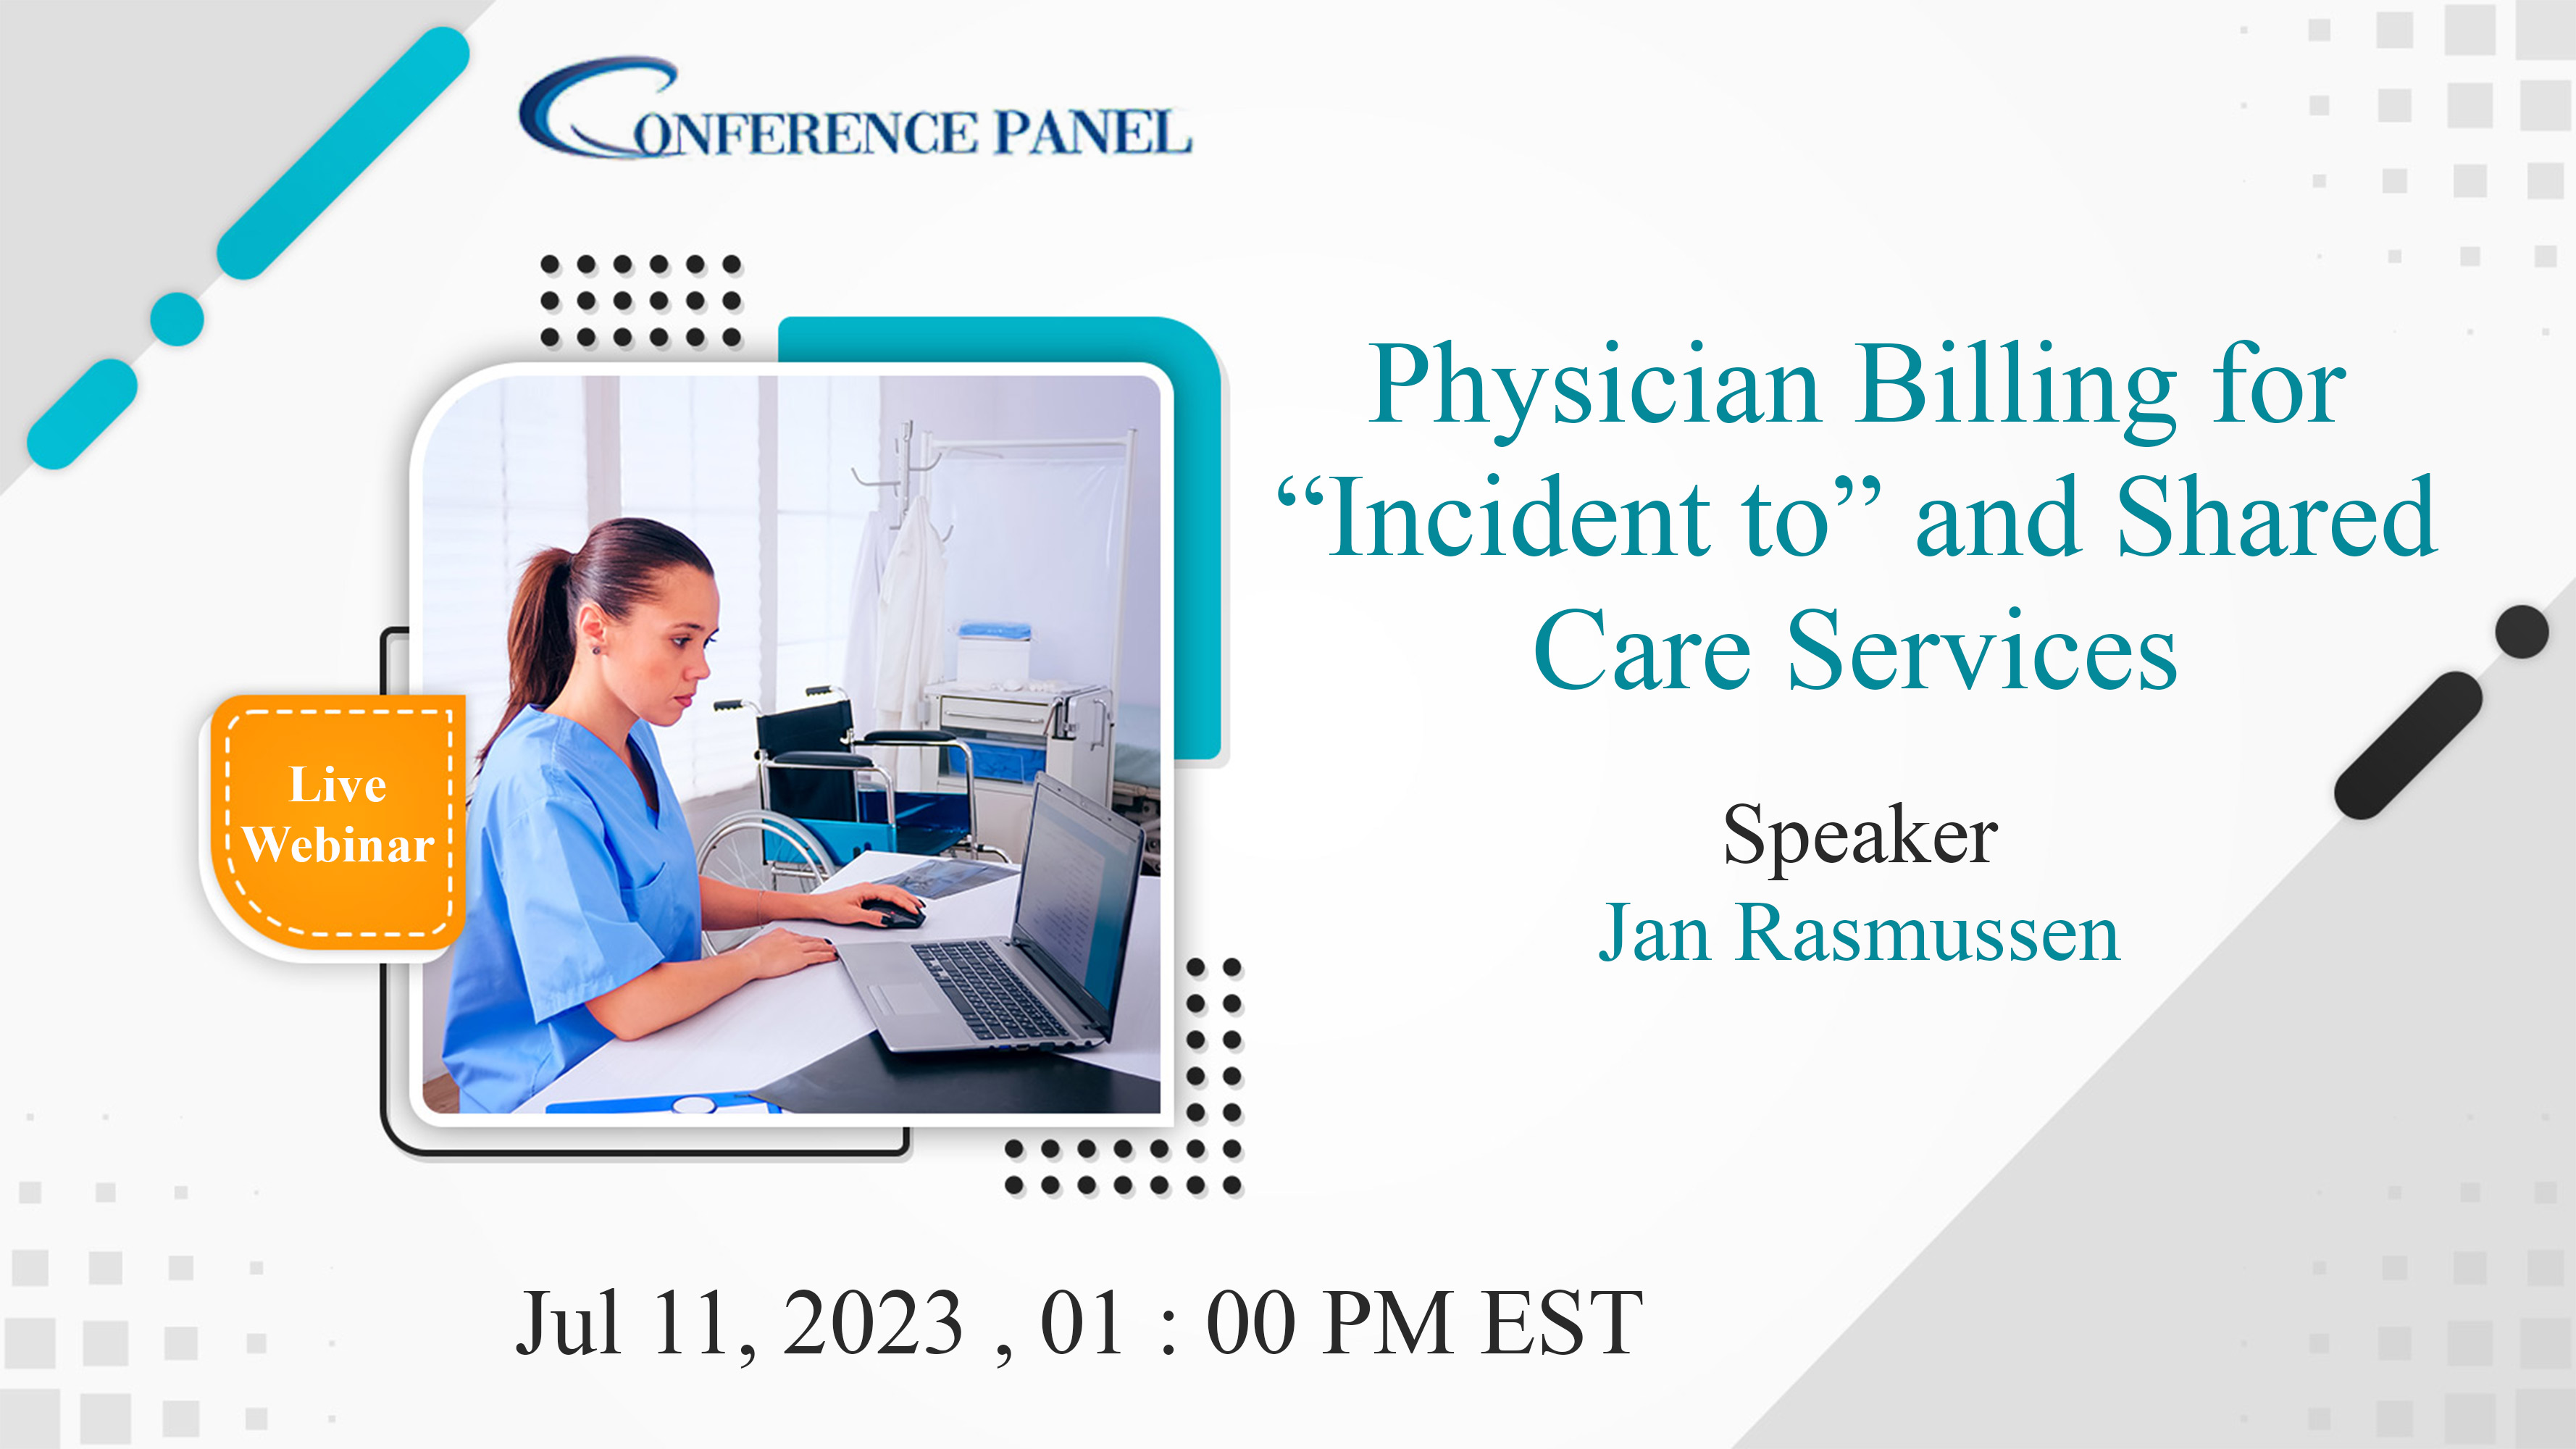 Physician Billing for “Incident to” and Shared Care Services, Online Event